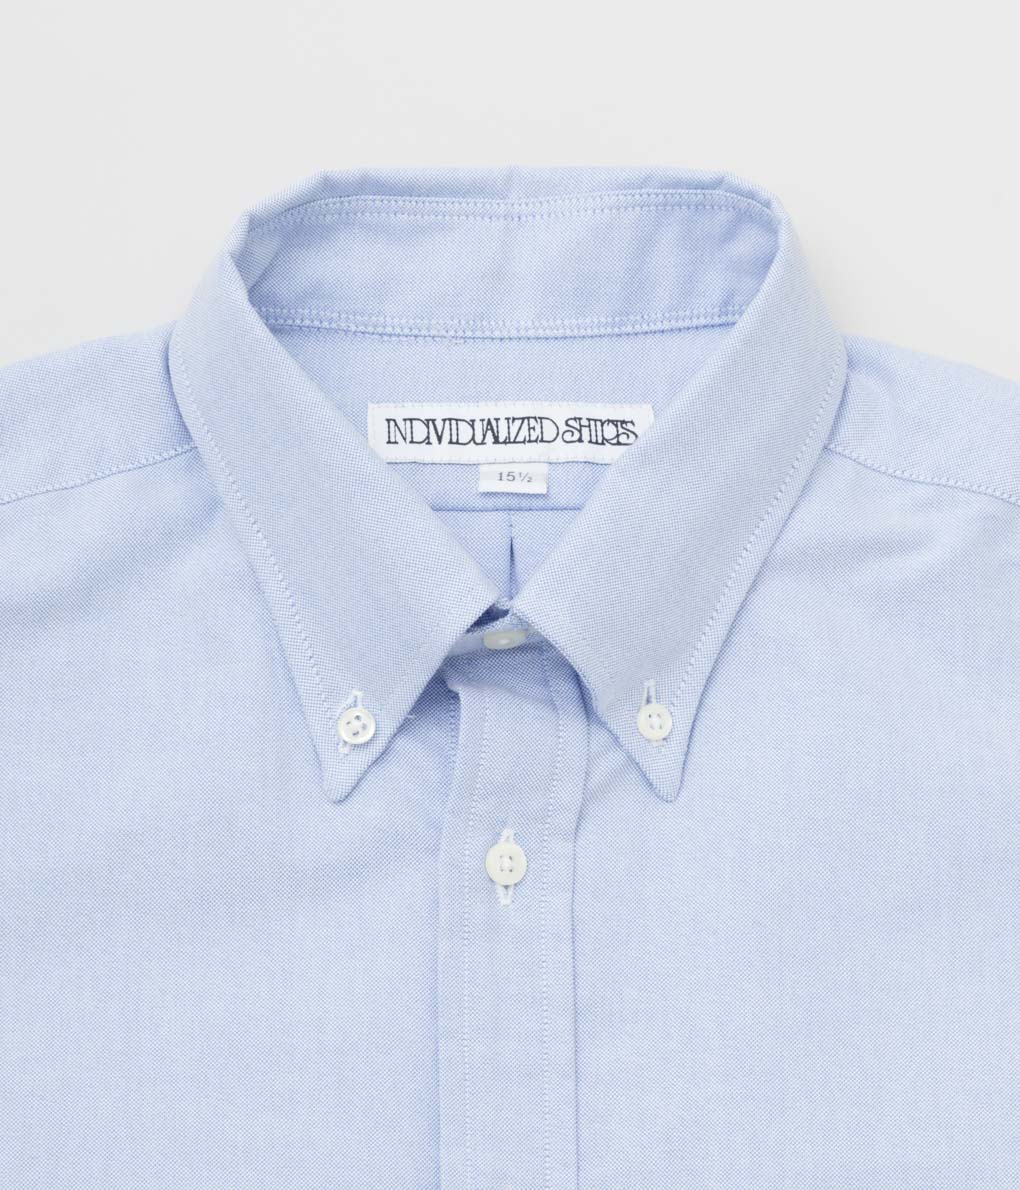 INDIVIDUALIZED SHIRTS "CAMBRIDGE OXFORD (NEW STANDARD FIT POP OVER SHORT SLEEVE SHIRT)"(LIGHT BLUE)